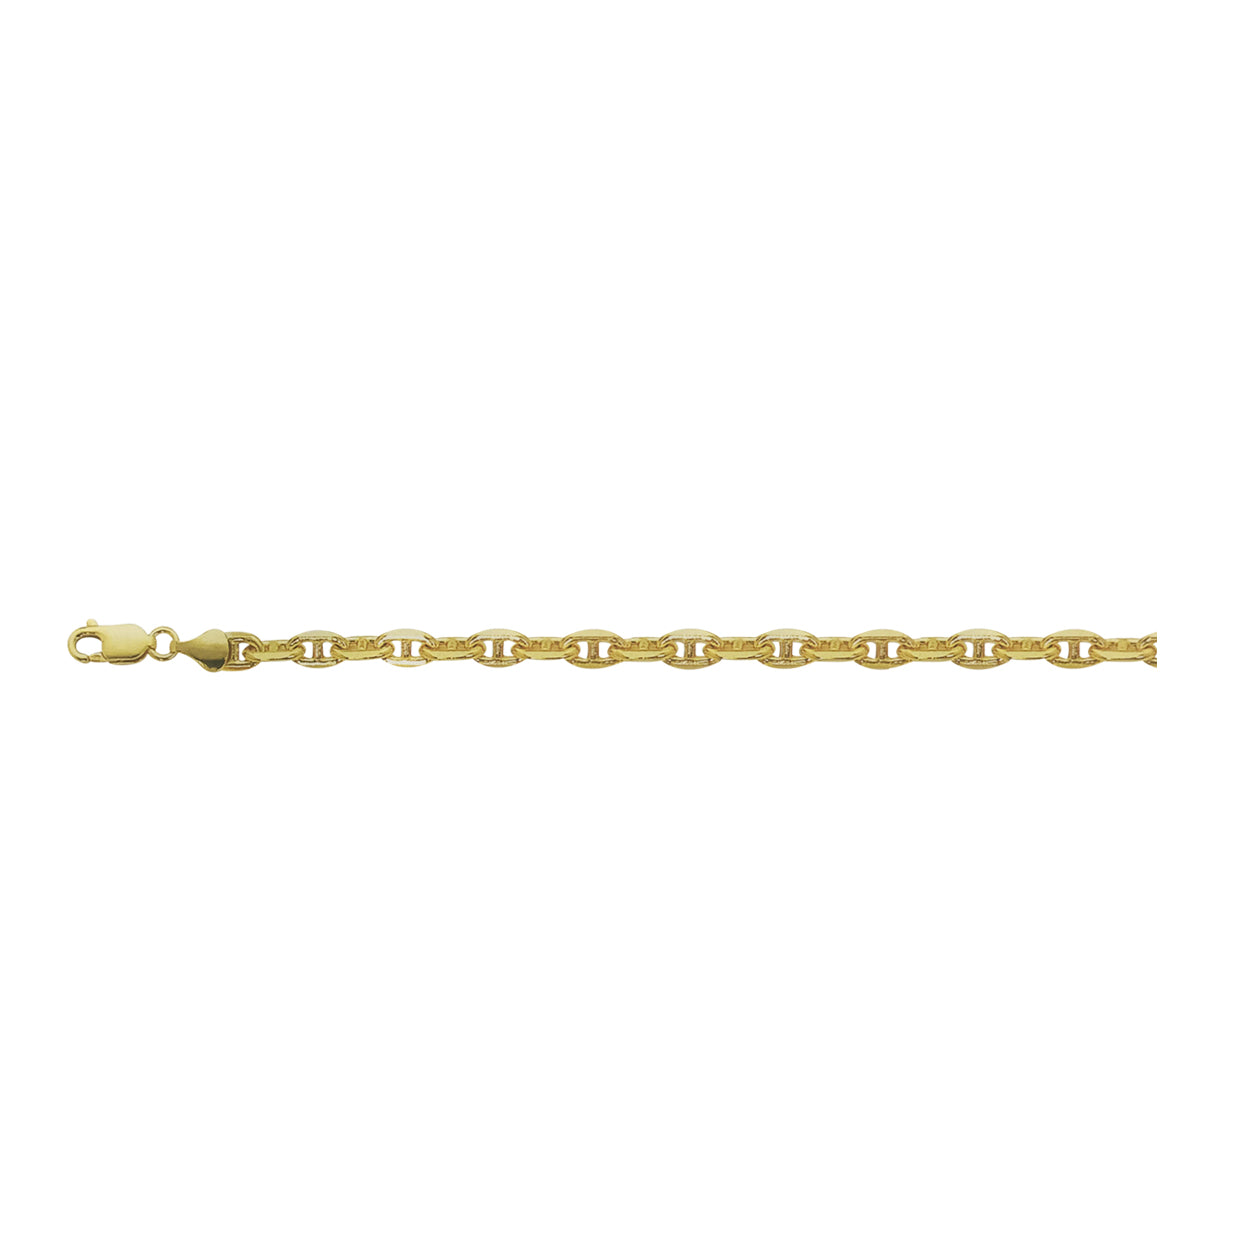 Vintage 610 15K Solid Yellow Gold Anchor Dragon Chain Link 